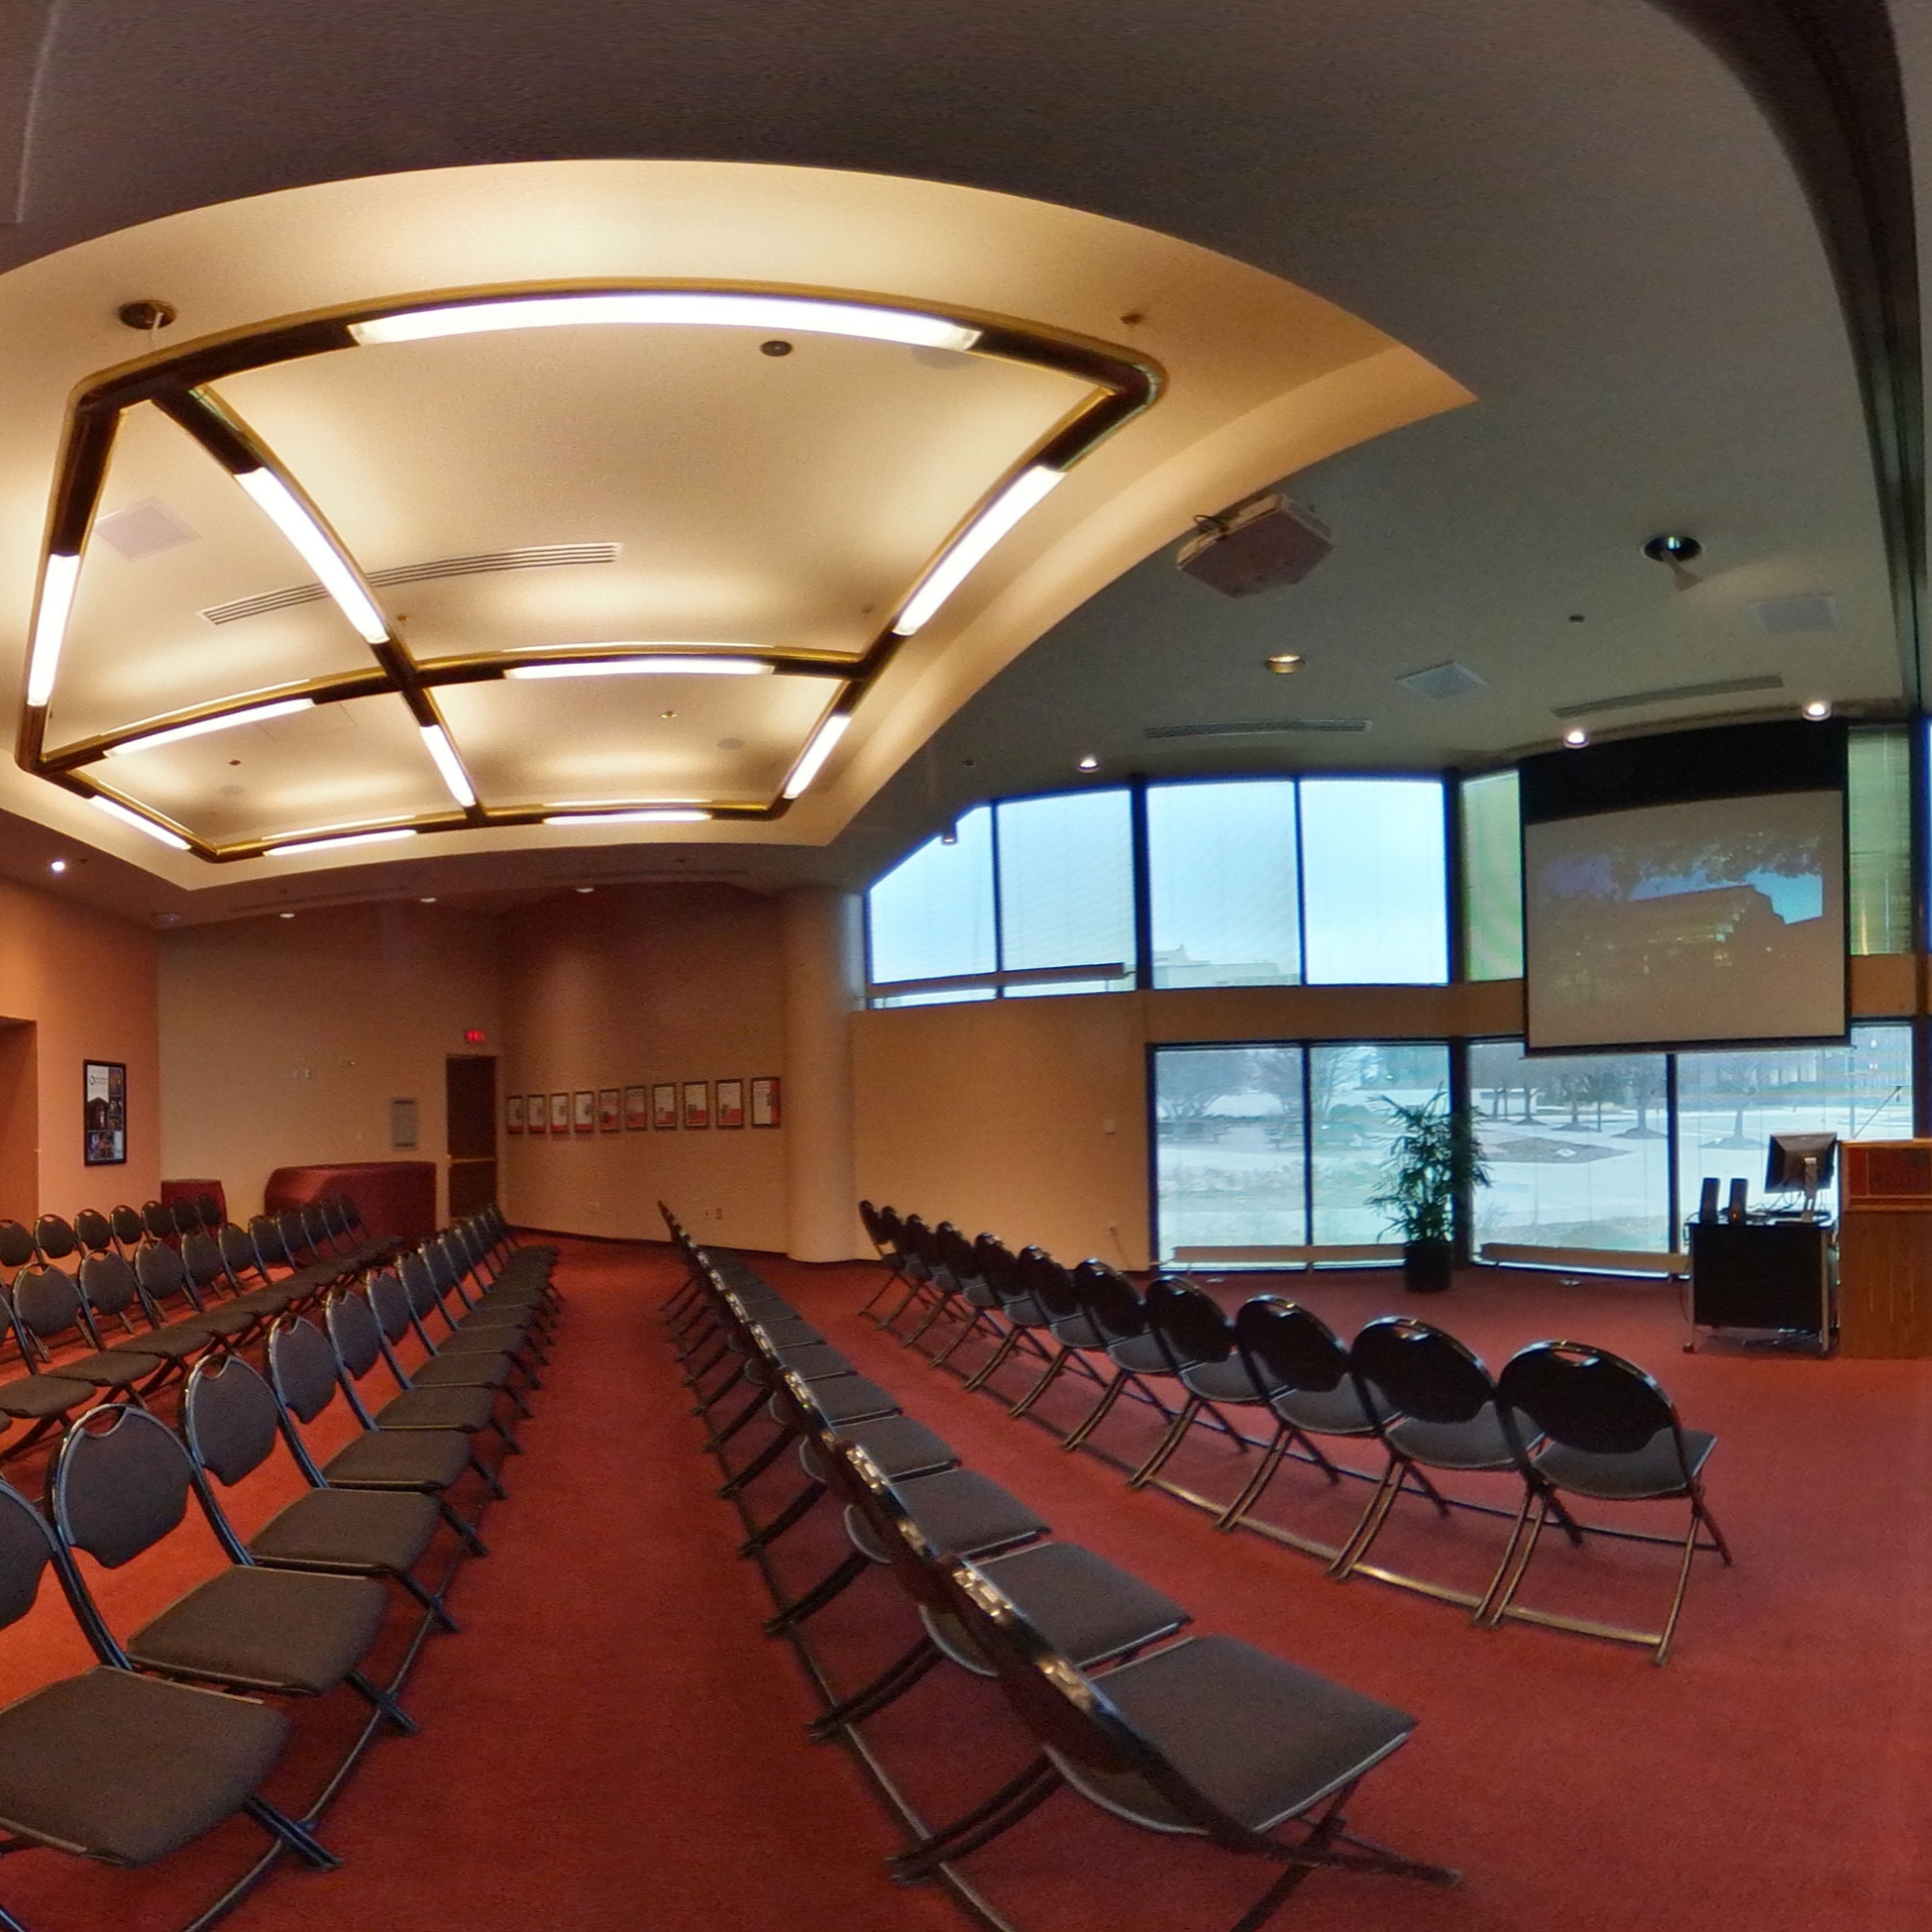 Image of the Lied Center Steinhart Room showing black chairs set up in a lecture format.